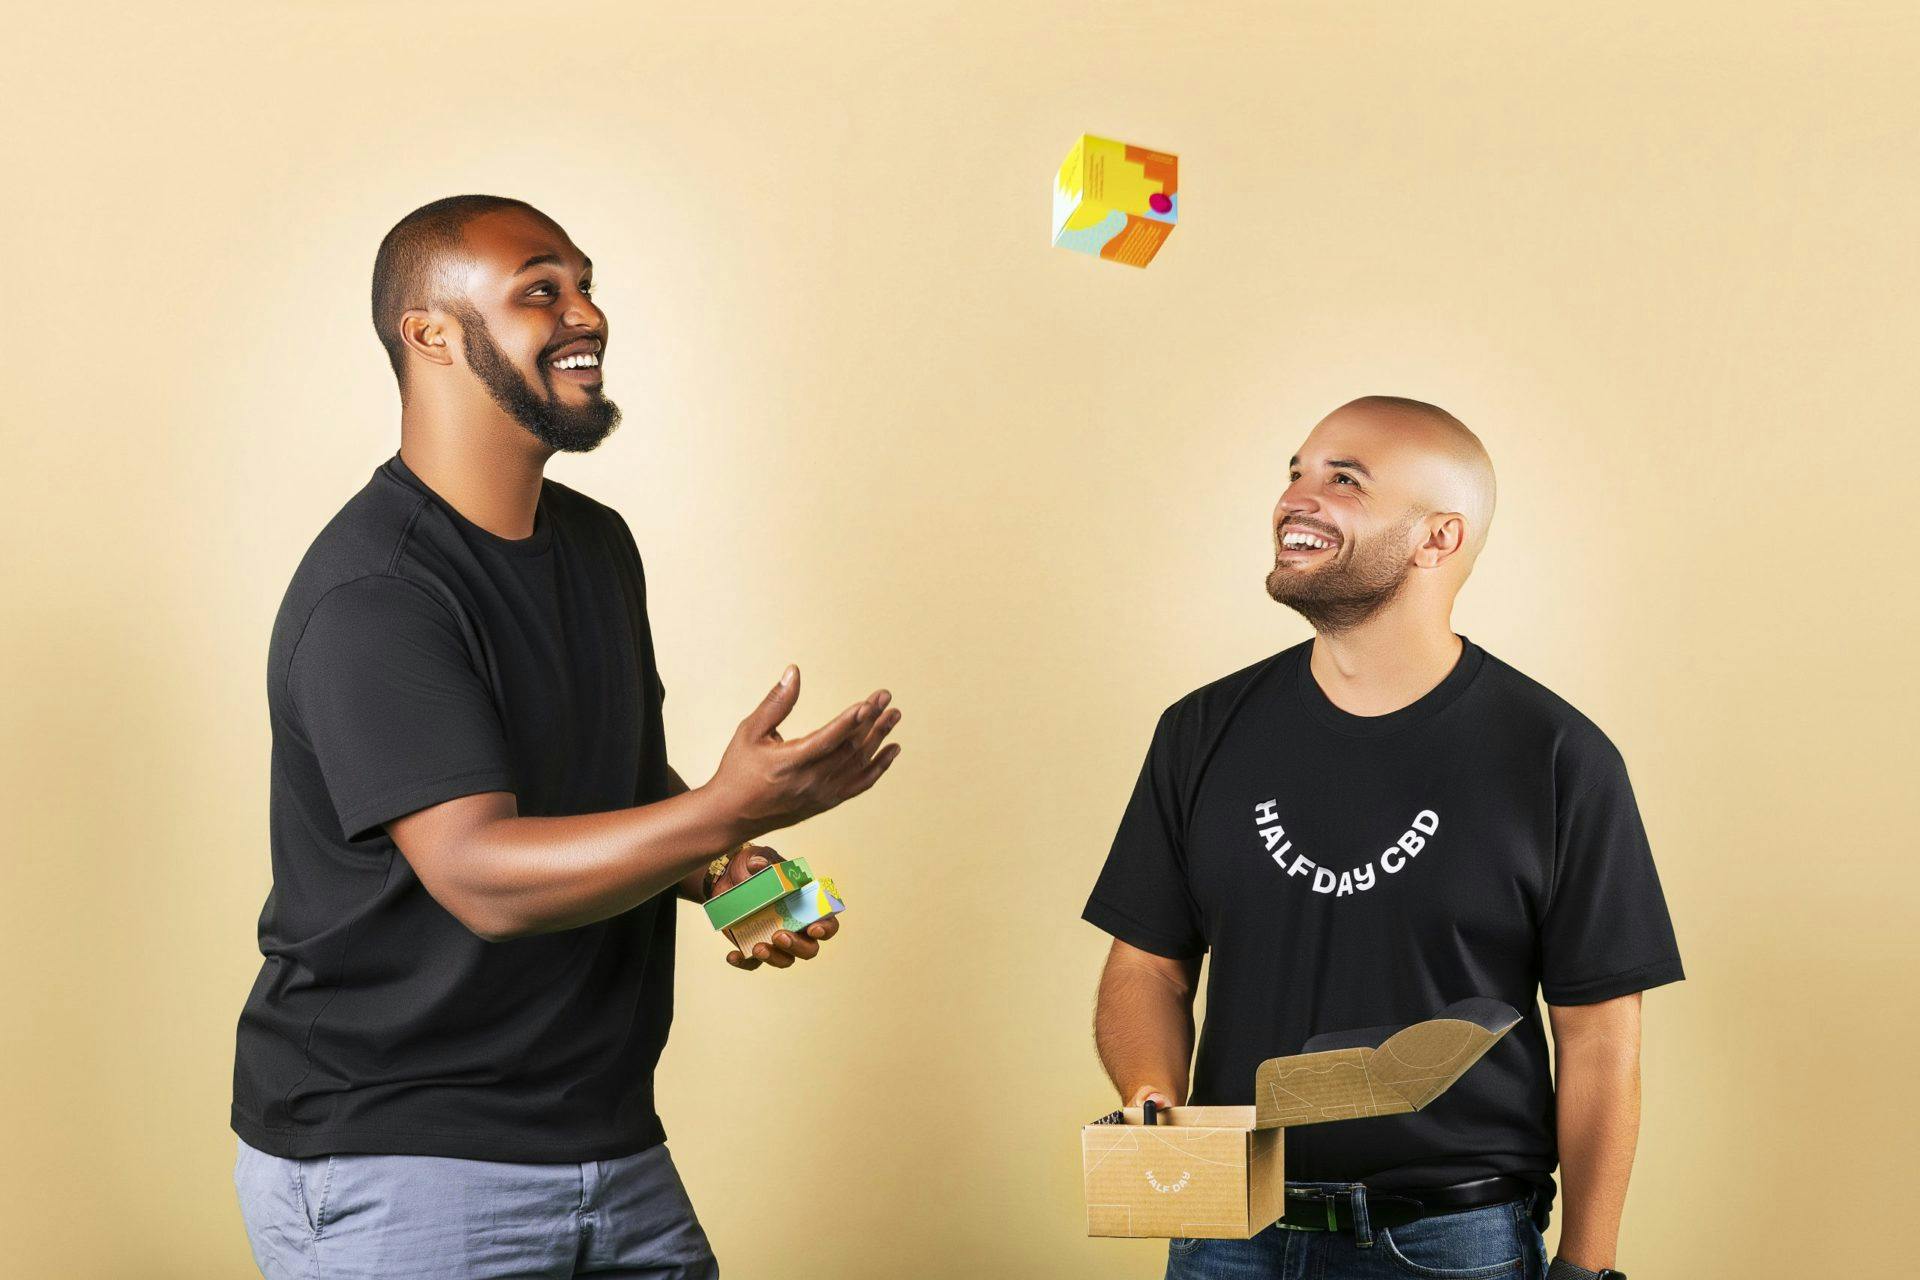 two bald men wearing black shirts, tall man tossing small box while the other holds empty opened box